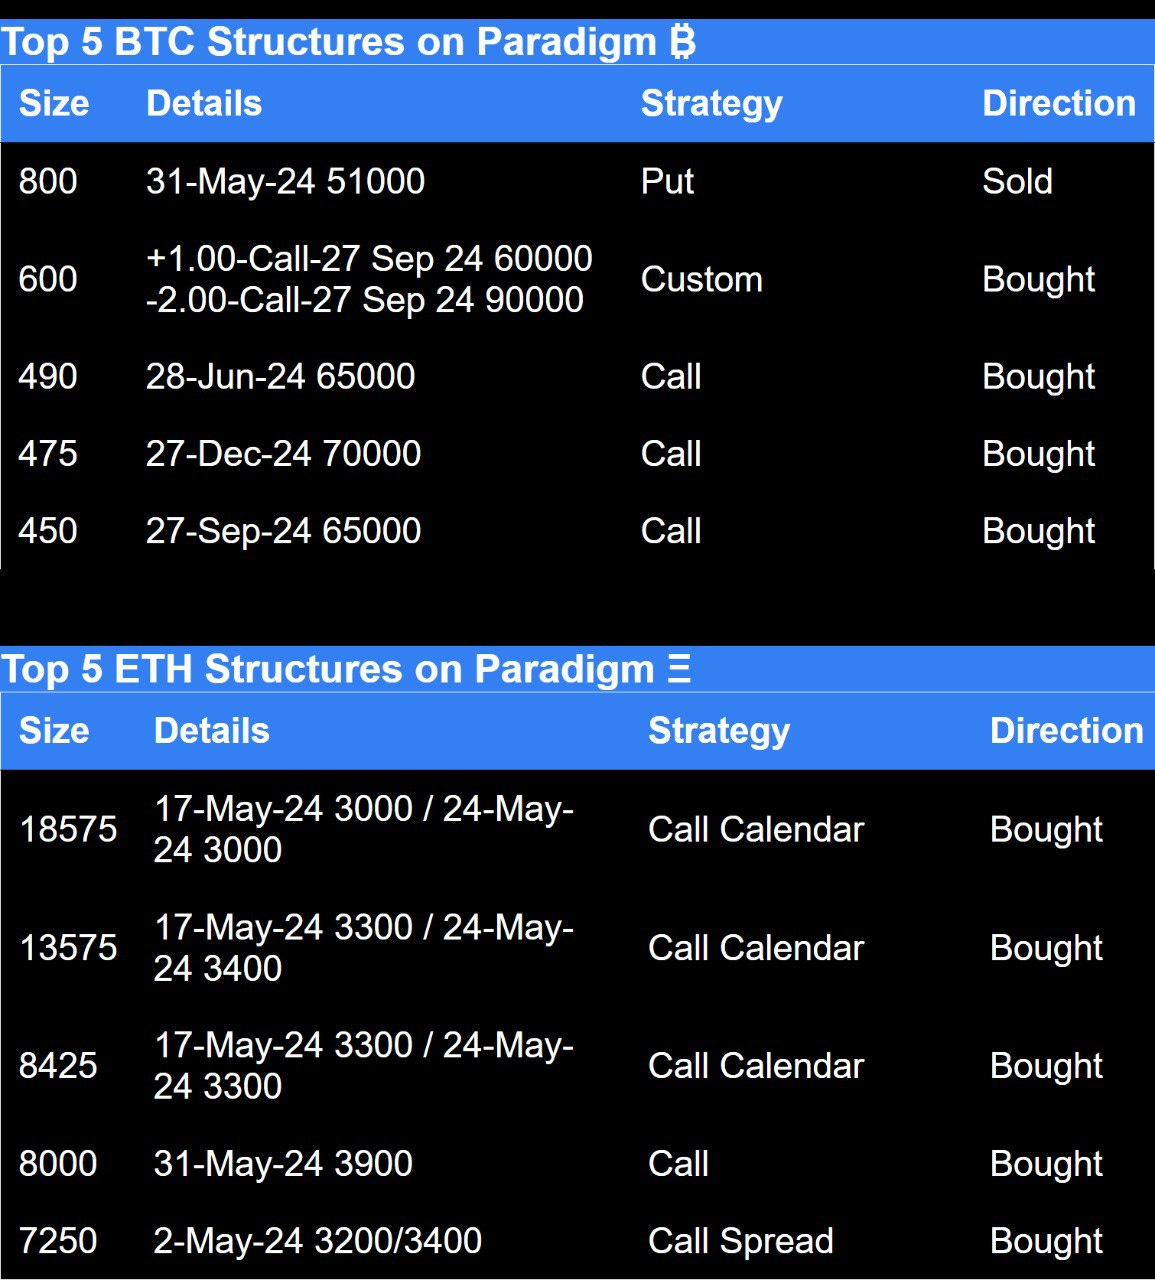 Paradigm top trades this week top 5 BTC structures and top 5 ETH structures for crypto options